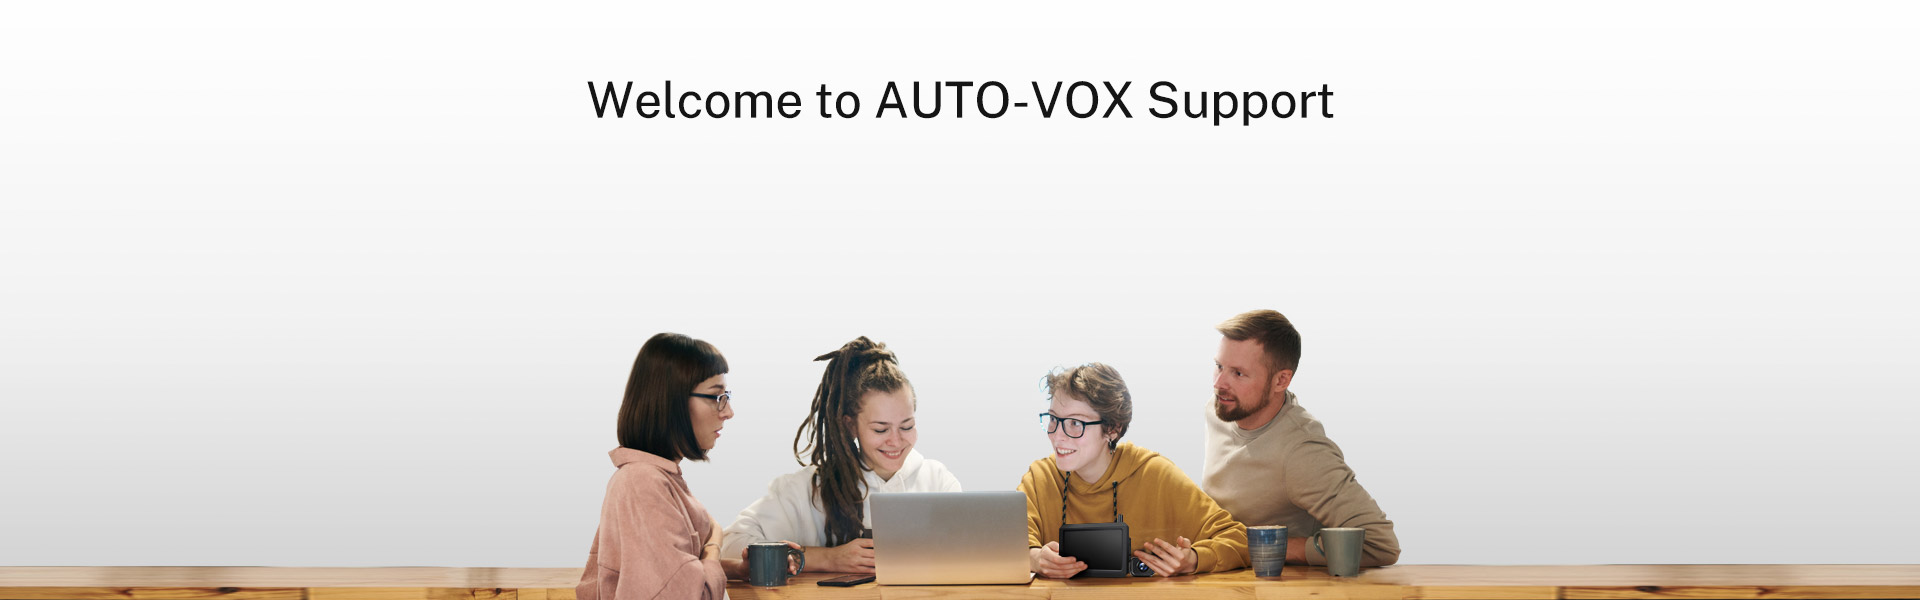 Welcome to Auto-Vox Support